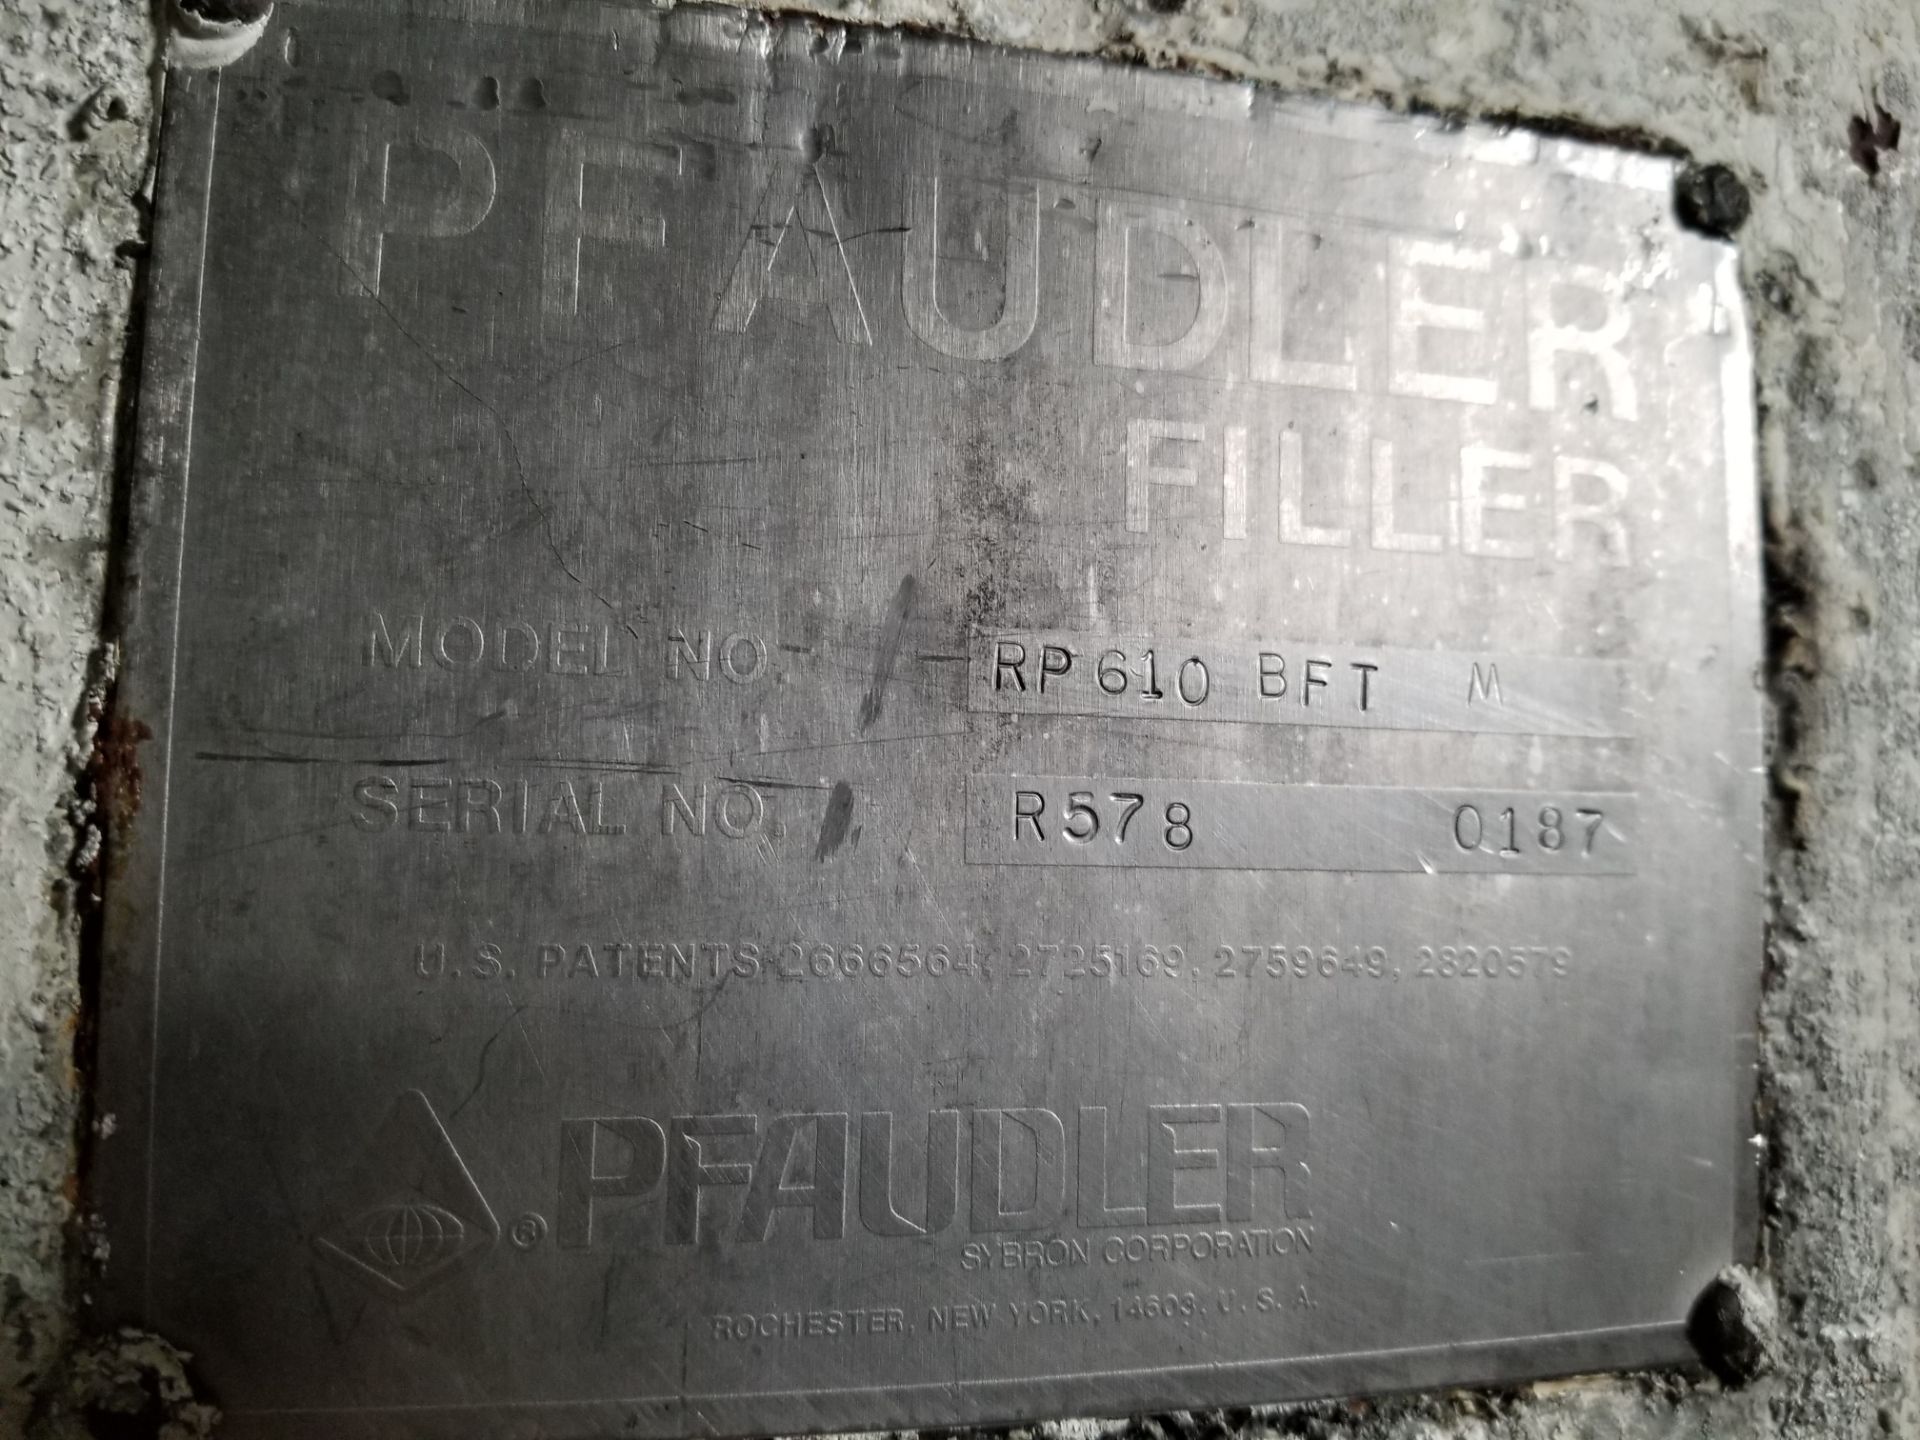 Pfaudler 10 Head Rotary Piston Filler Model: RP610 Serial: R5760240, Stainless Steel Product Contact - Image 2 of 2